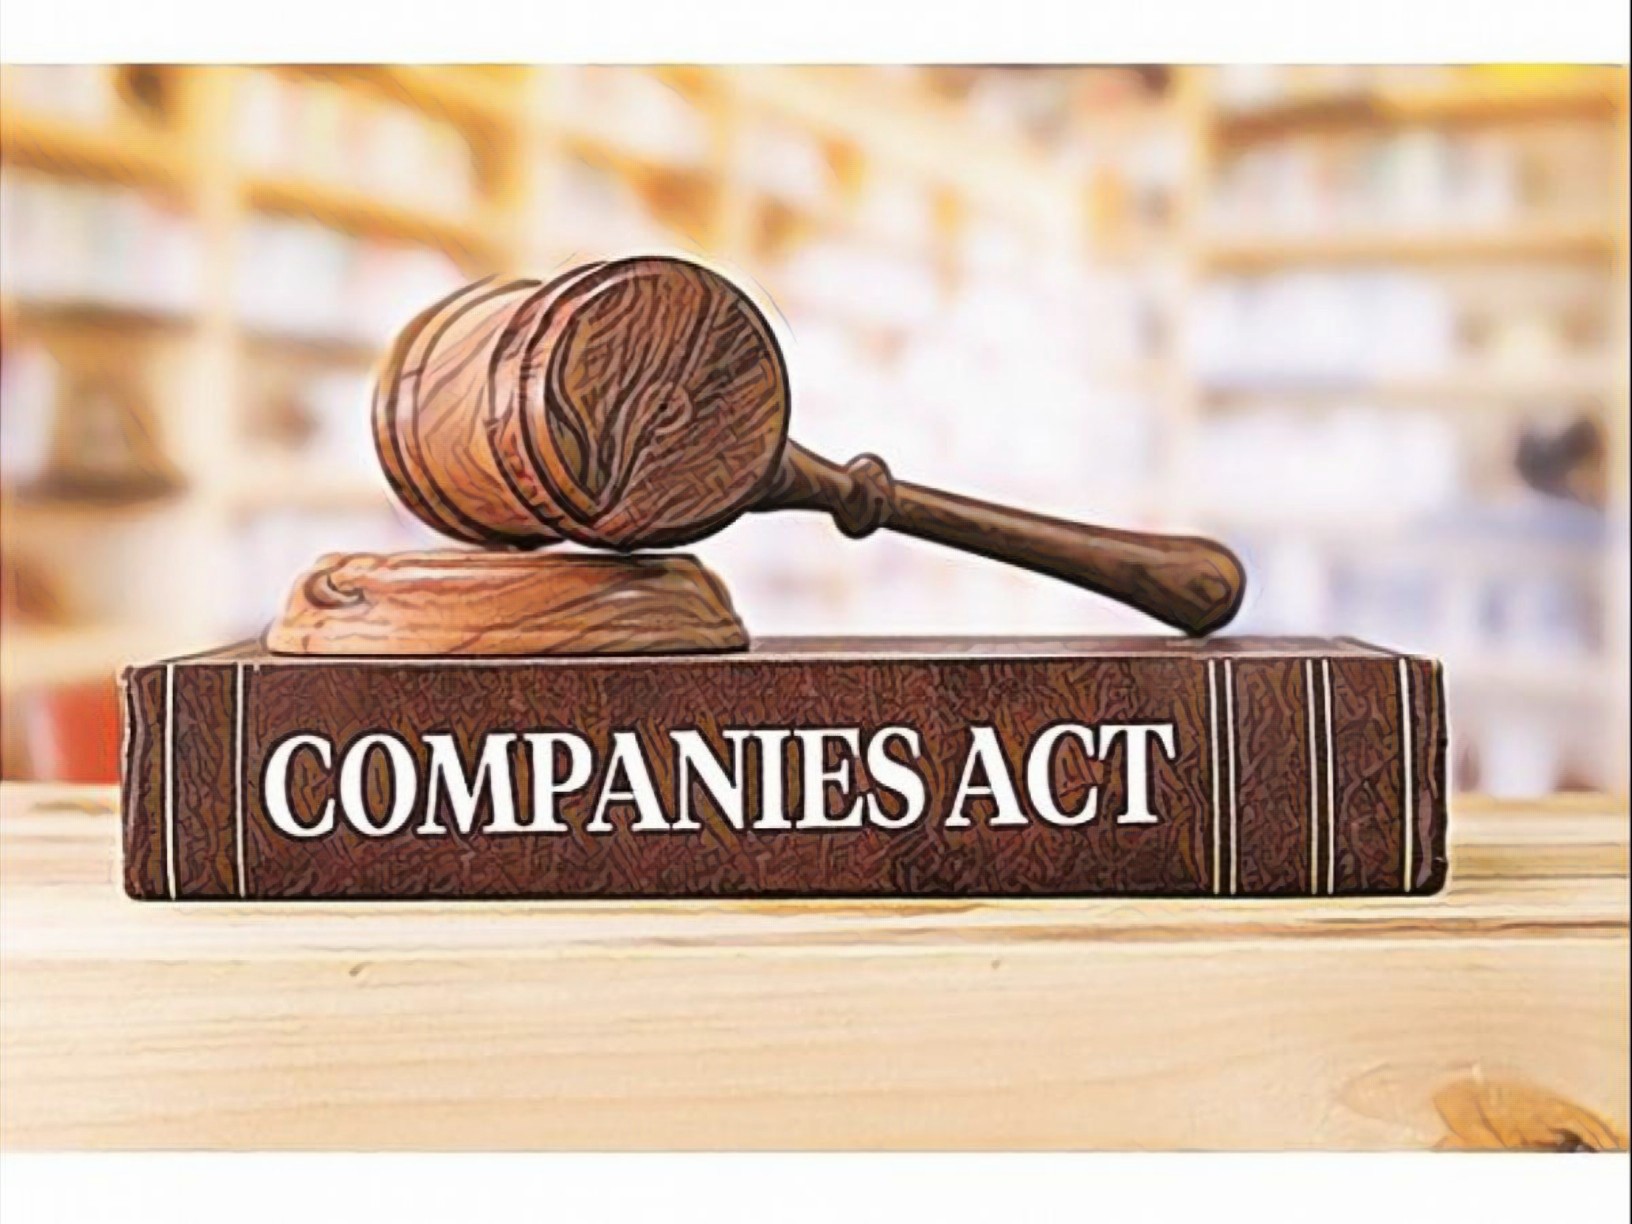 Section 137 of the Companies Act 2013